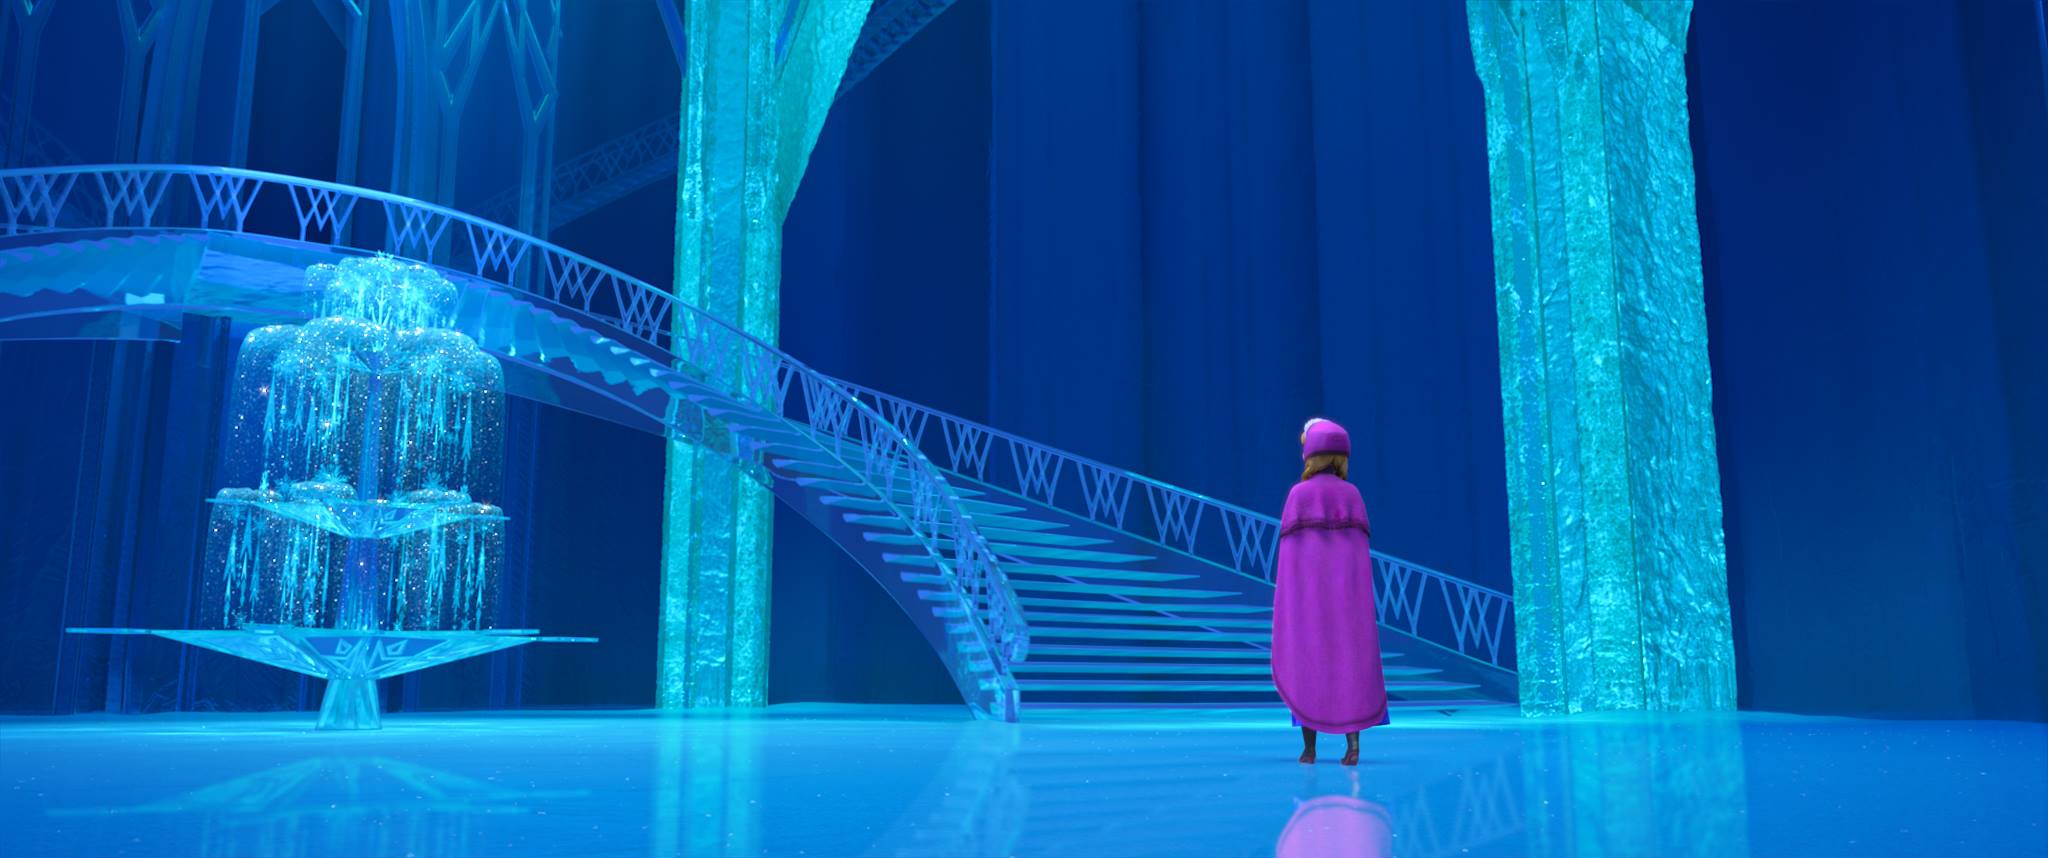 New 'Frozen' Image Show Off Elsa's Ice Palace, Arendelle & More!